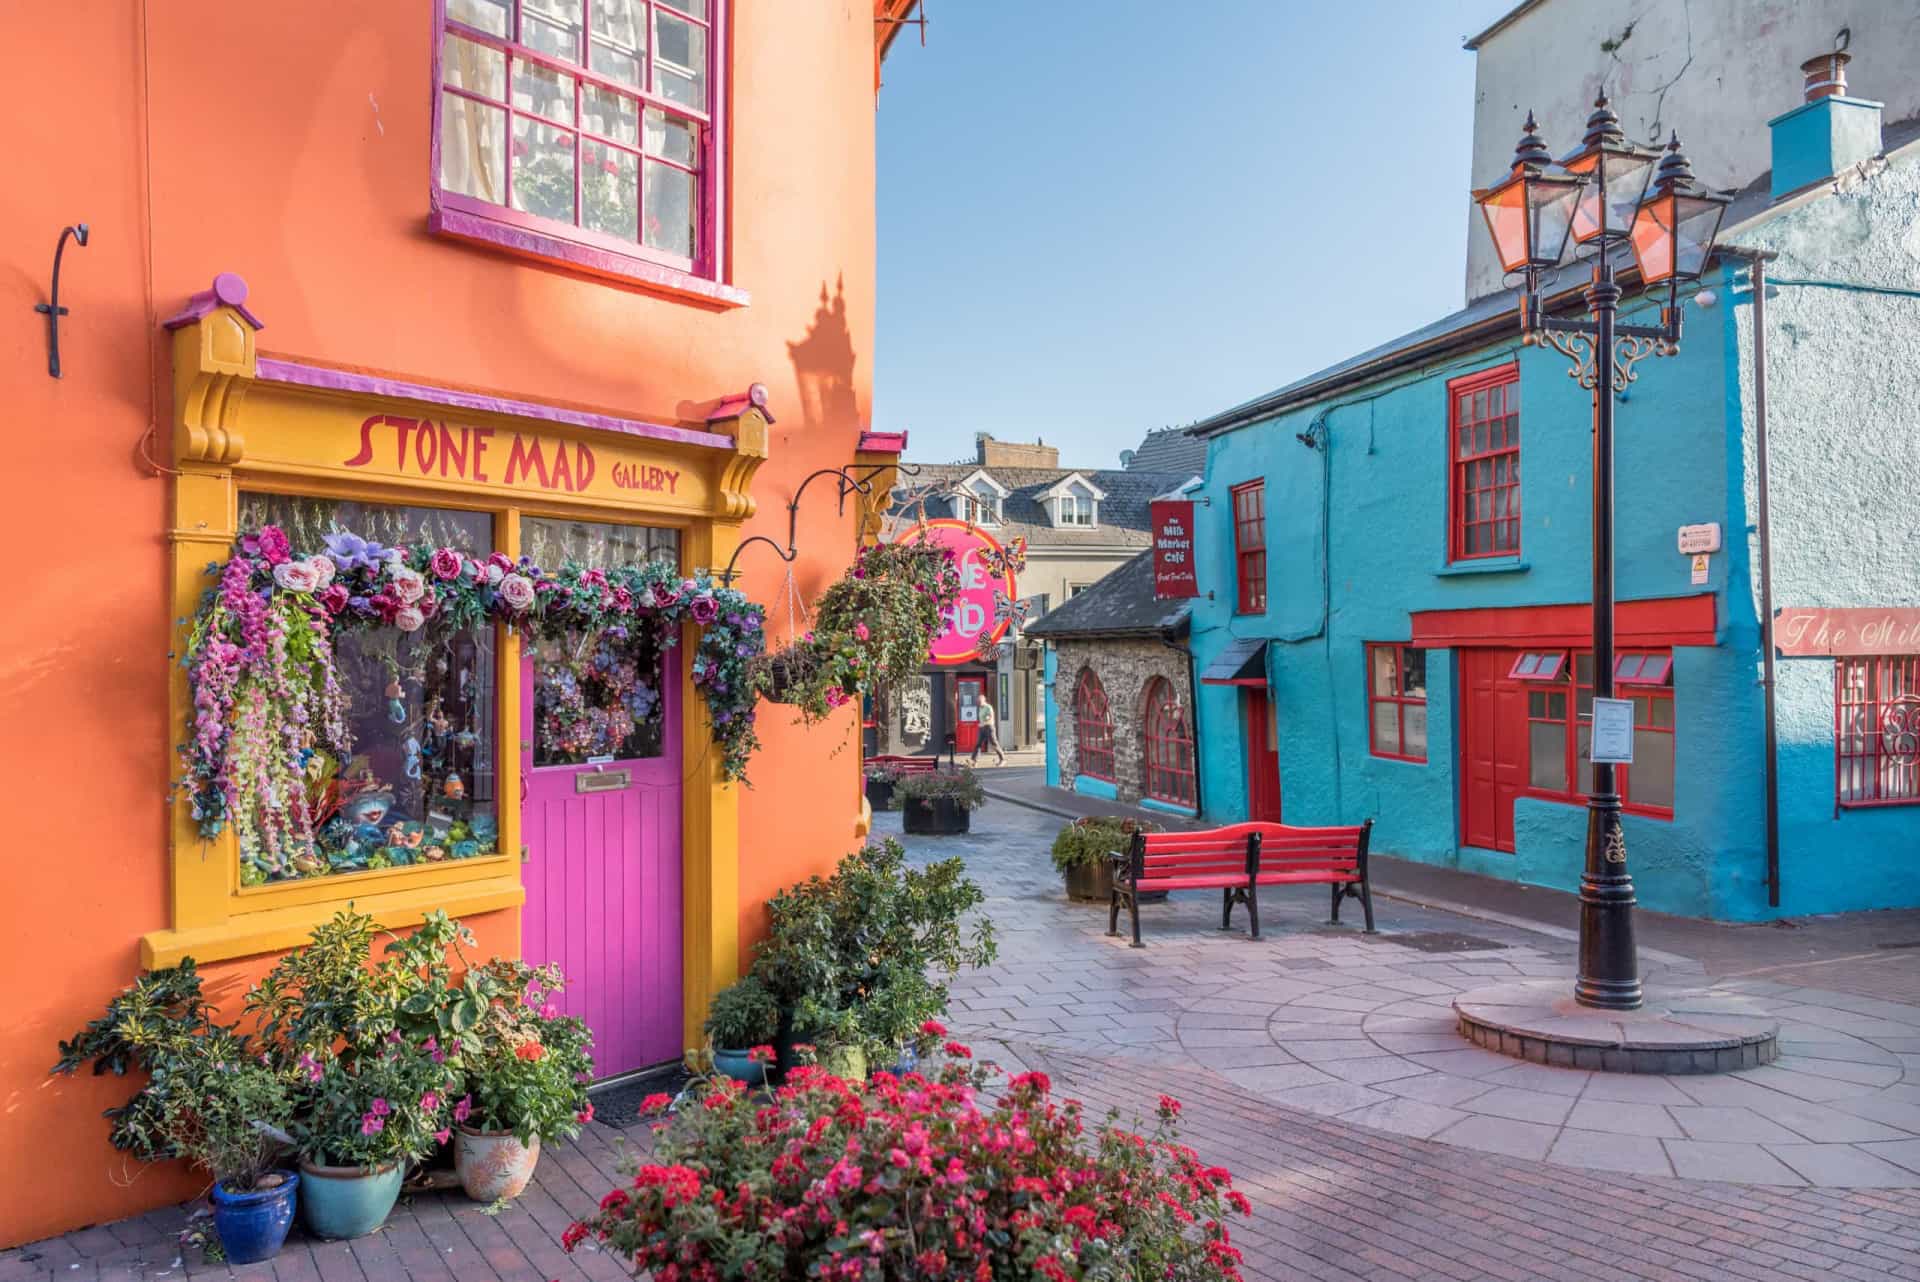 <p>Located at the start of the Wild Atlantic Way, a 2,500-km (1,533 mi) scenic tourist on the west coast, and on parts of the north and south coasts, Kinsale is known for its historic and brightly-colored streetscape. Notable buildings include the early 16th-century Desmond Castle and Markey House, completed in 1600.</p>